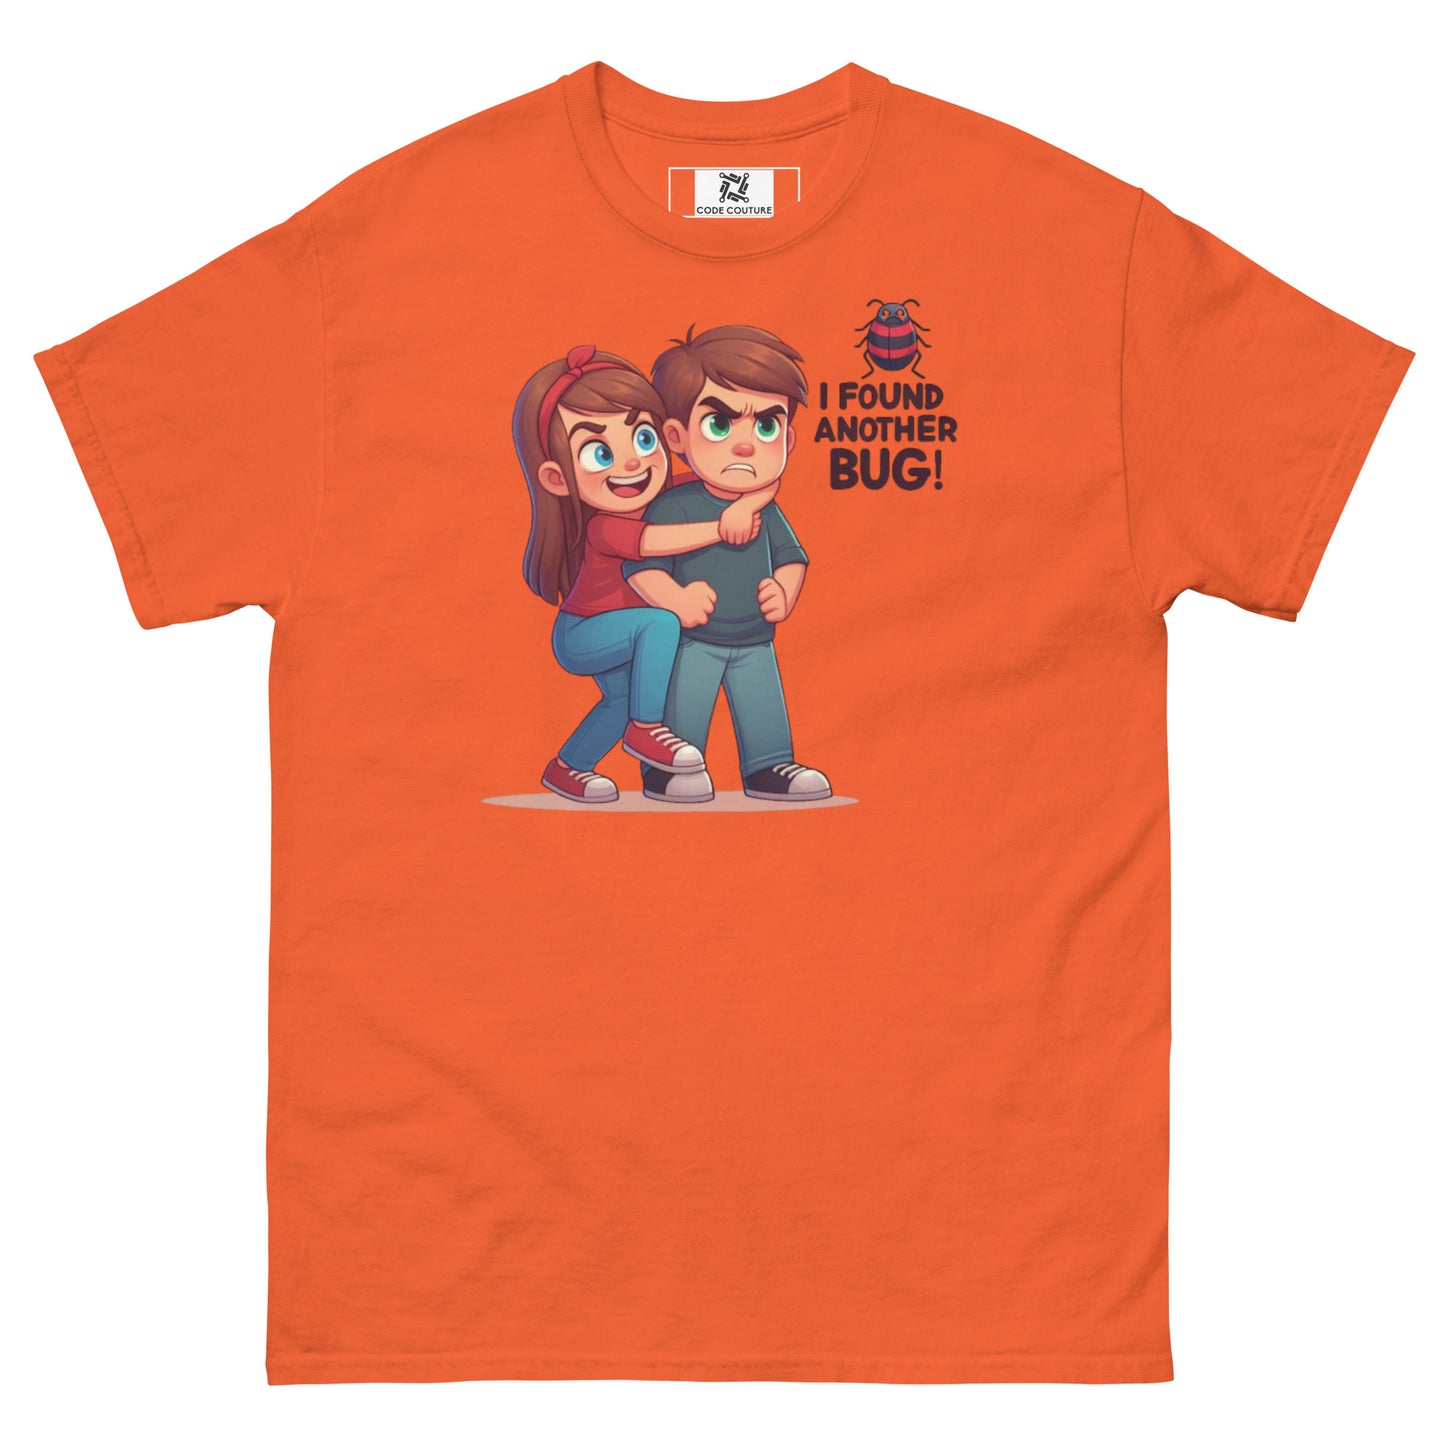 Found Another Bug classic tee - Dark